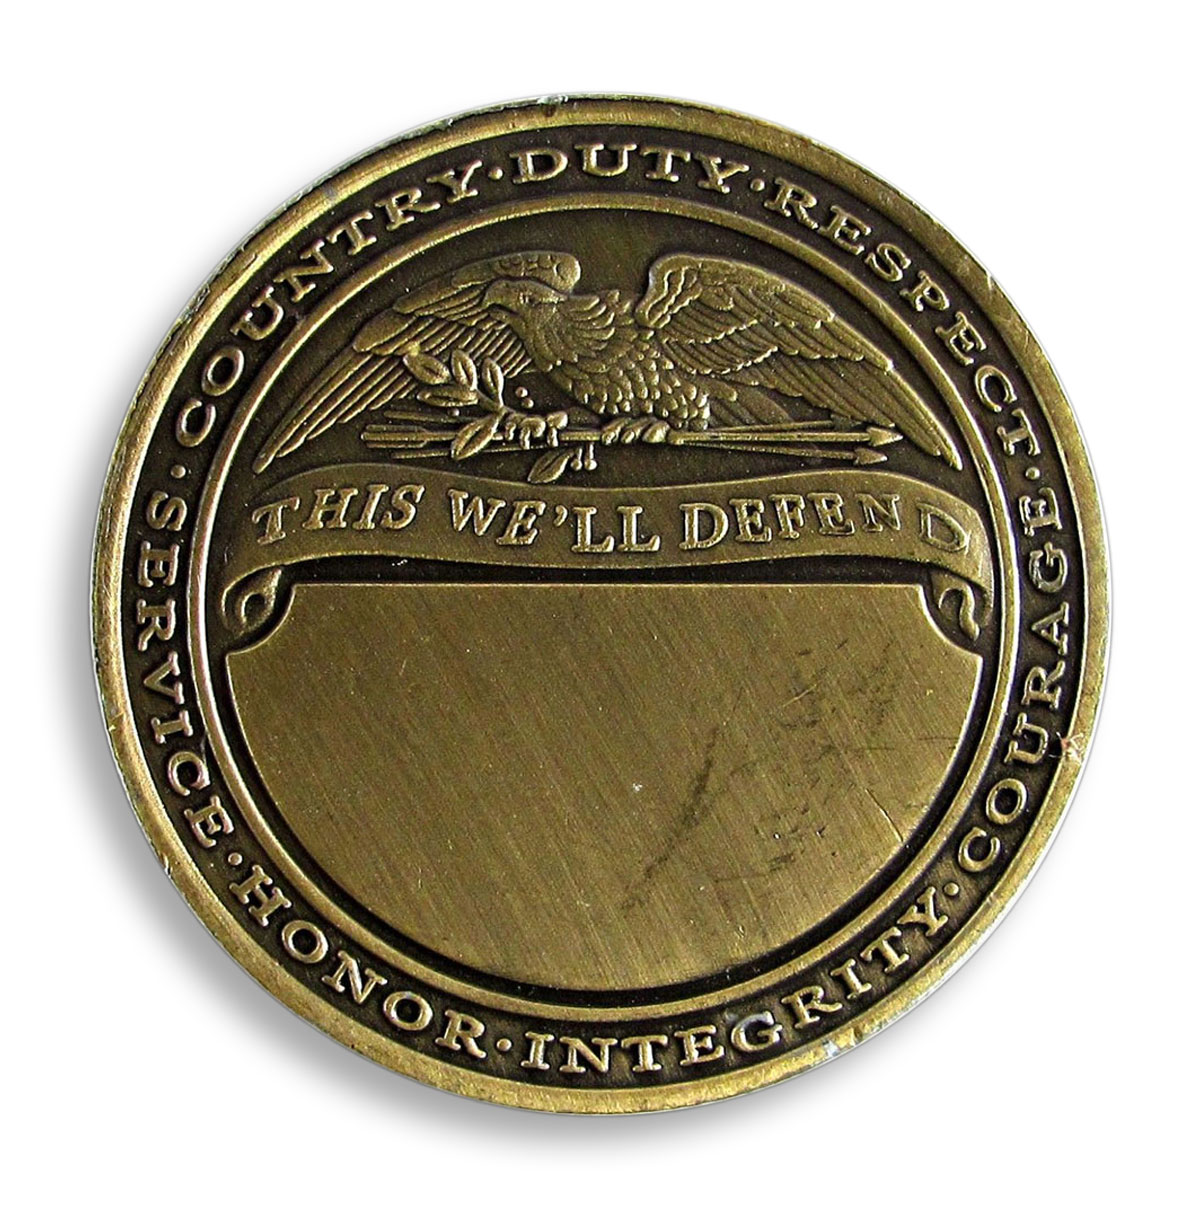 USA, All American, 82nd Airborne Division, Troops, Courage, Military,Duty,Token